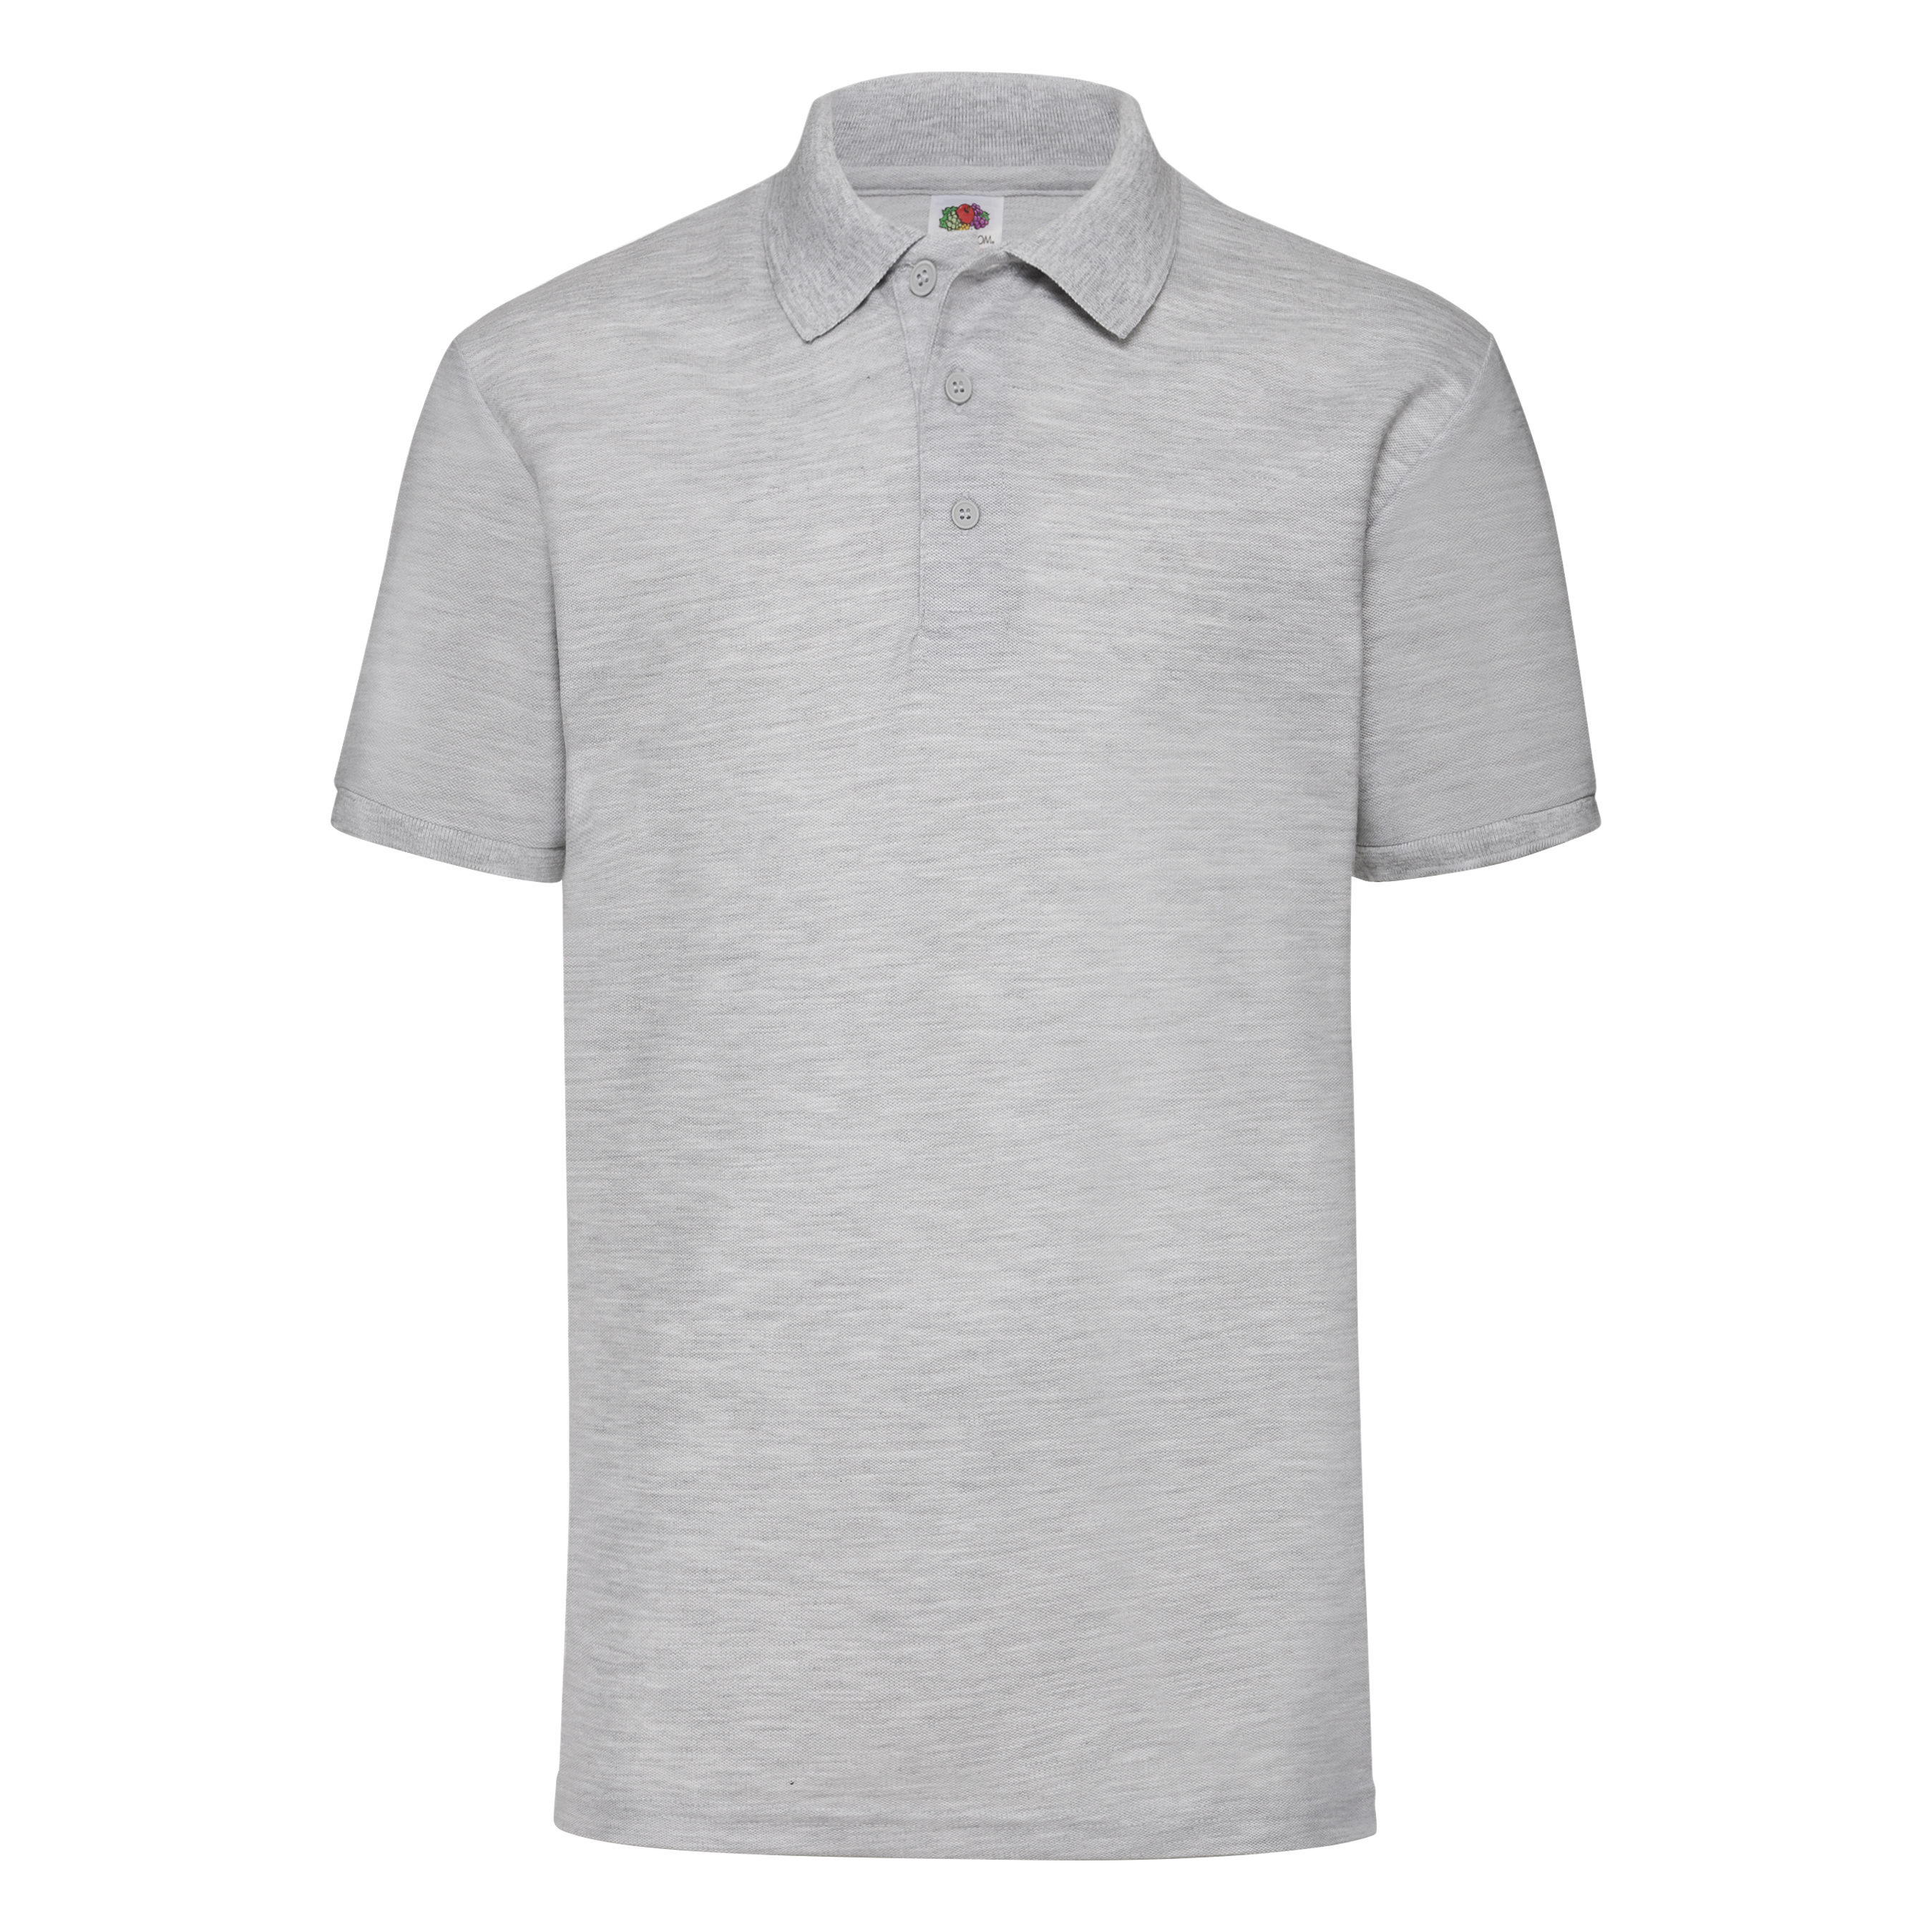 ax-httpswebsystems.s3.amazonaws.comtmp_for_downloadfruit-of-the-loom-65-35-polo-heather-grey.jpg